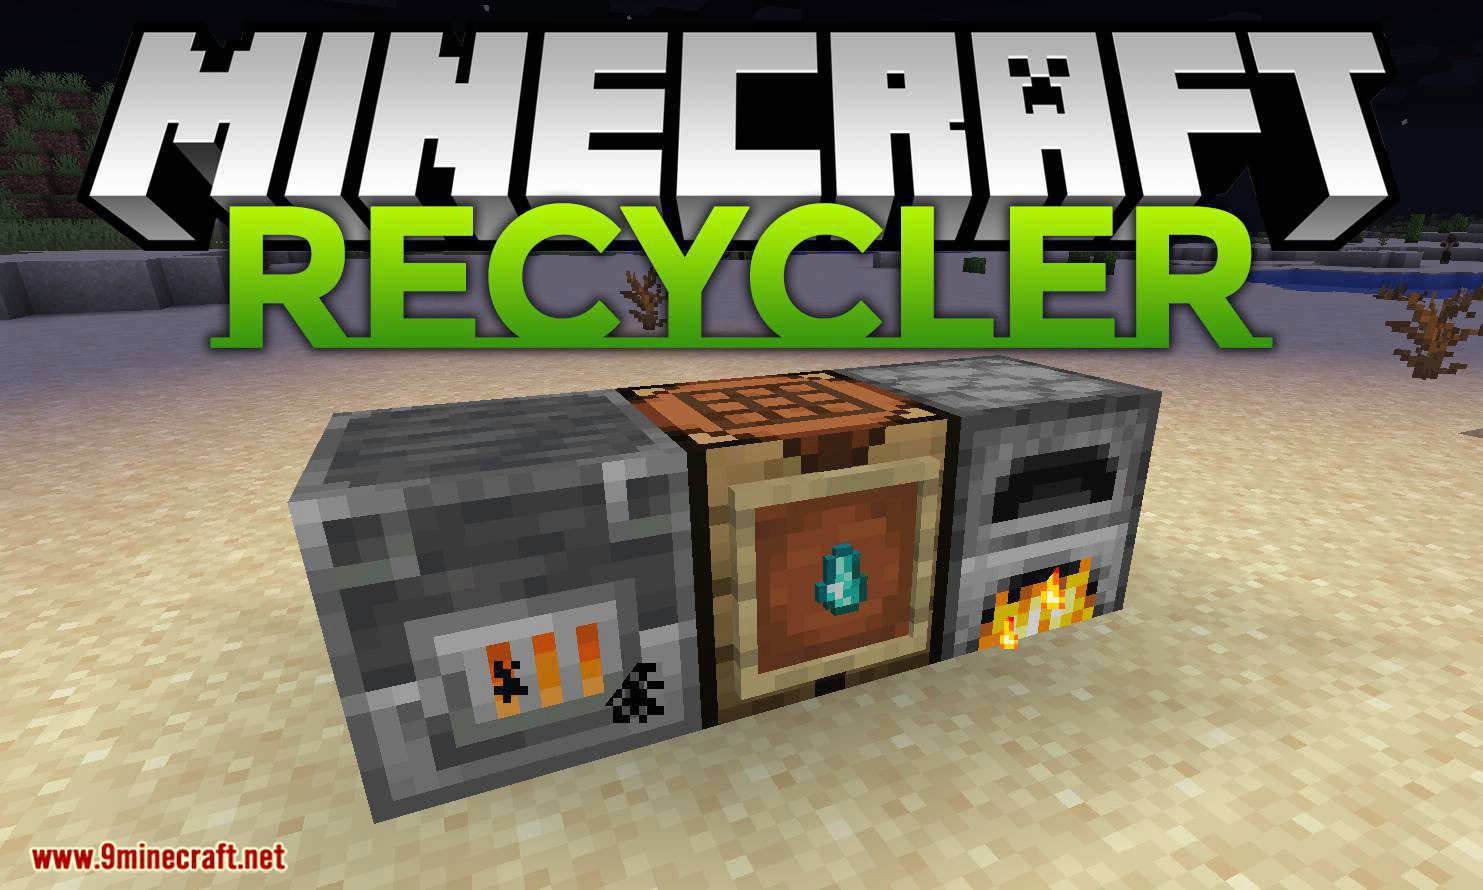 Recycler mod for minecraft logo